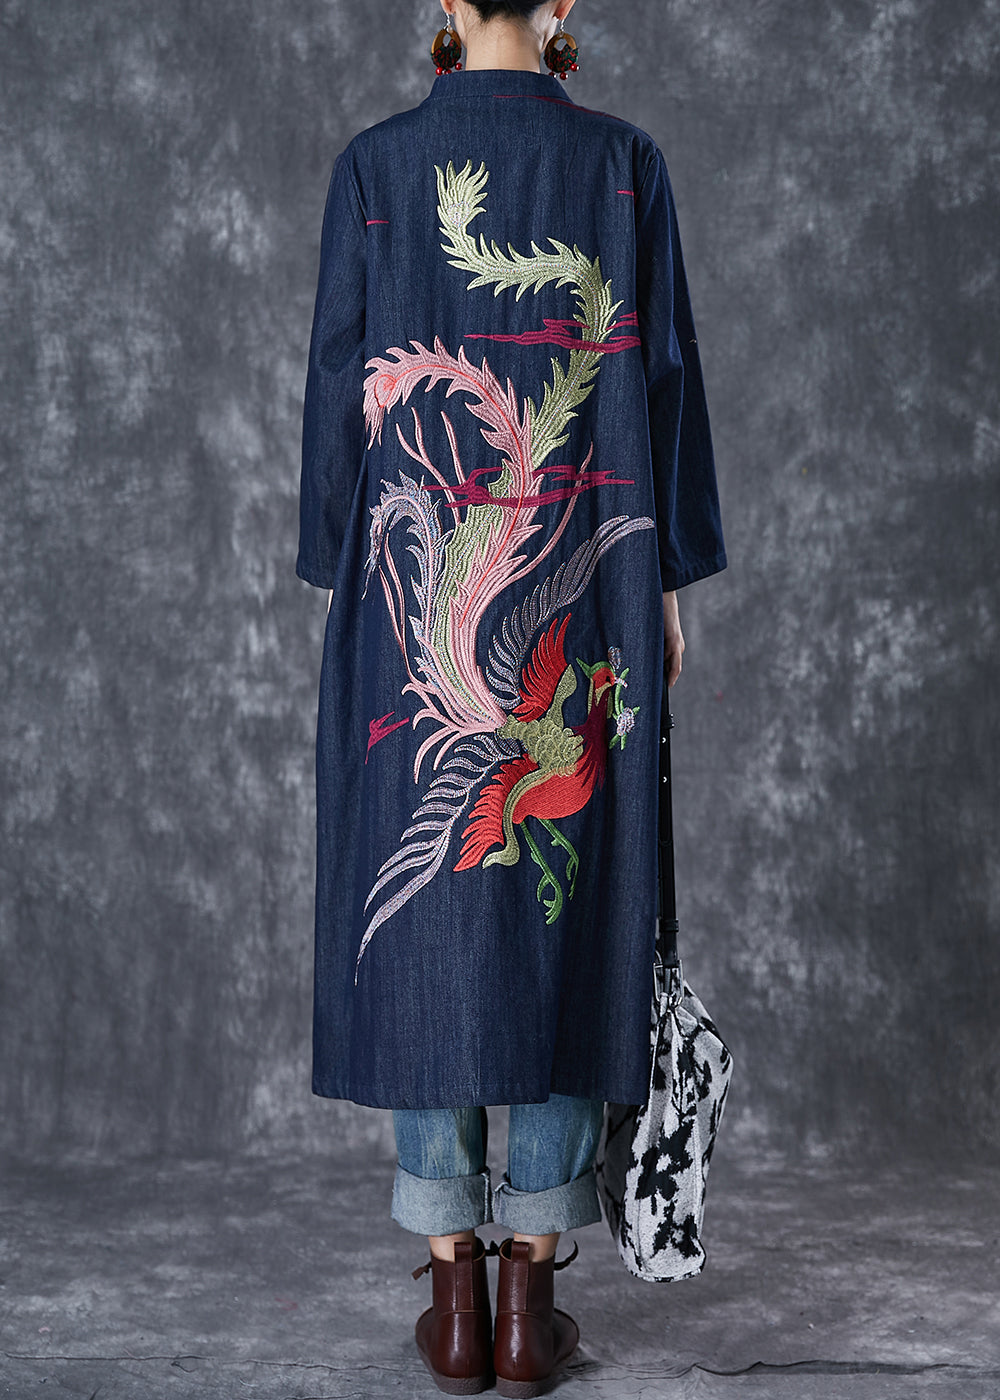 Chic Navy Phoenix Embroideried Chinese Button Denim Trench Fall